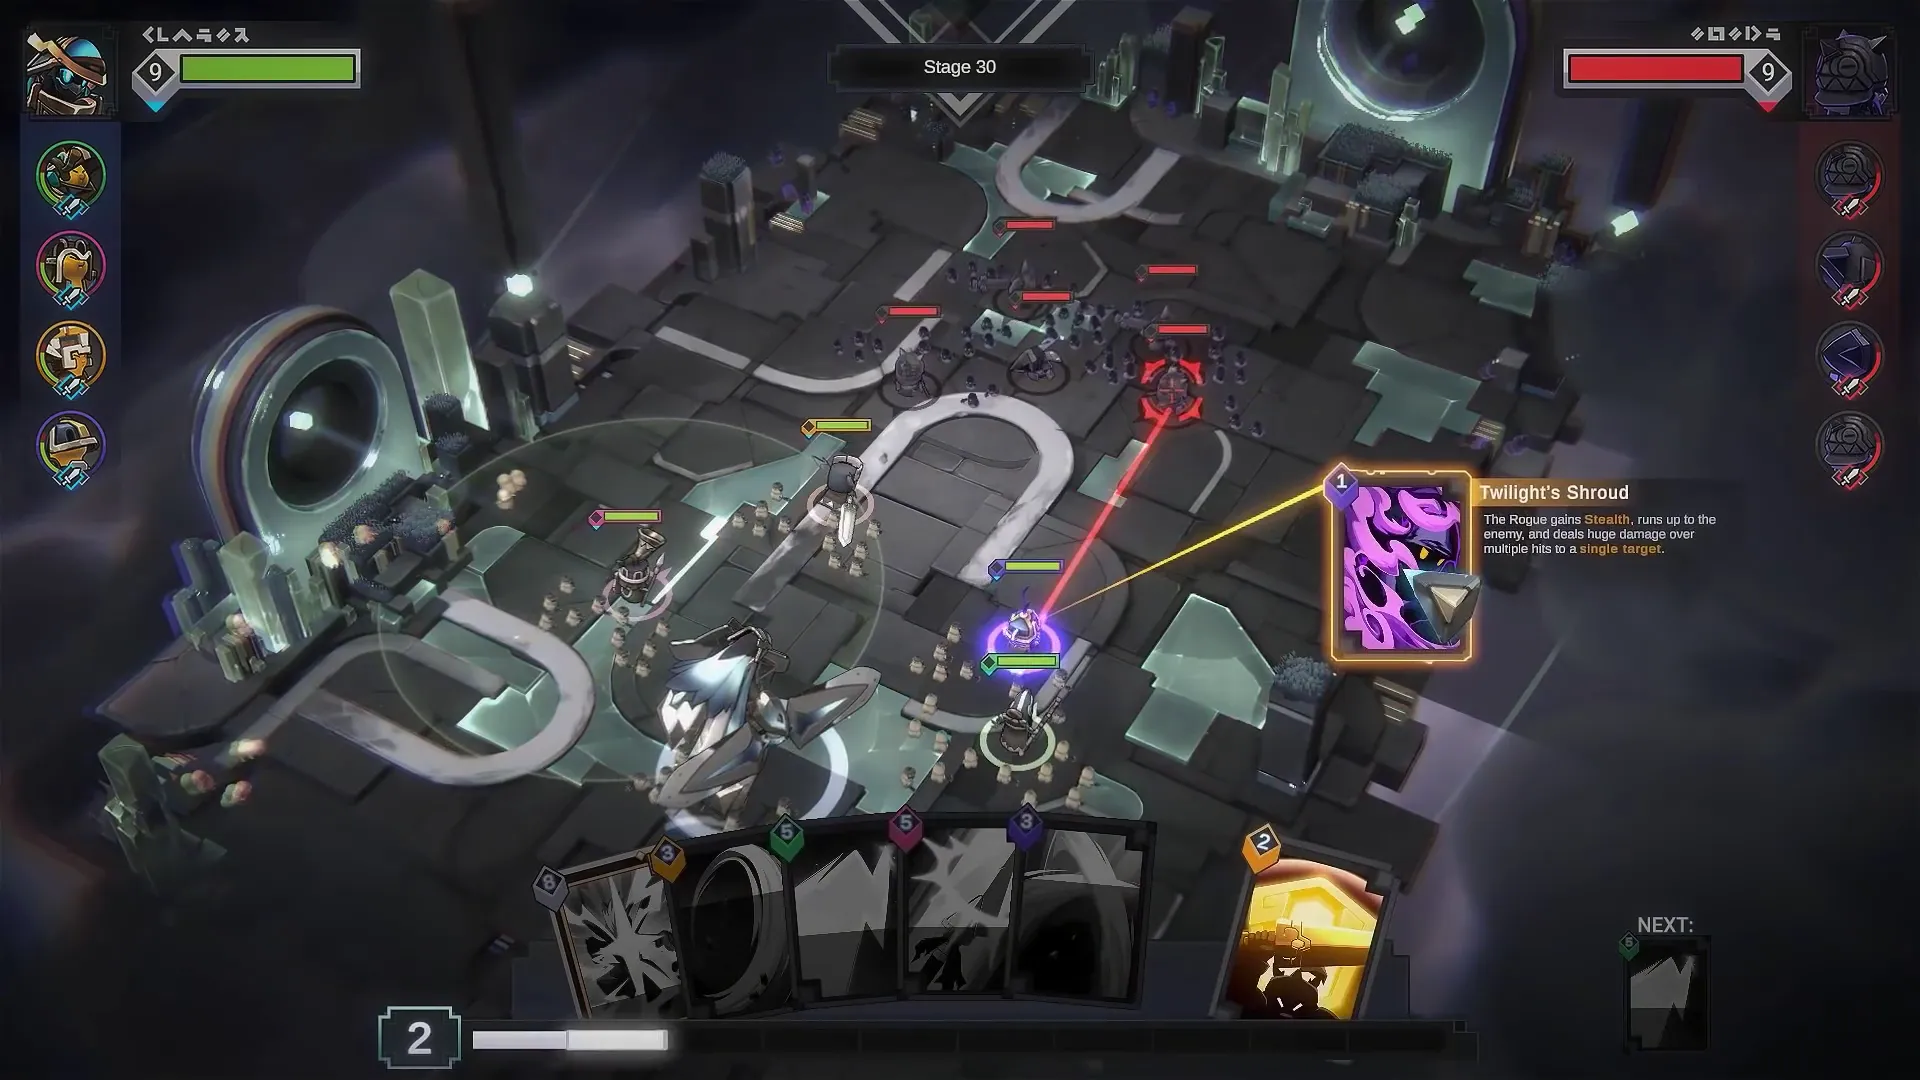 A screenshot of the gameplay in Apeiron vividly displays the intricate game interface that players can fully experience while playing the game.